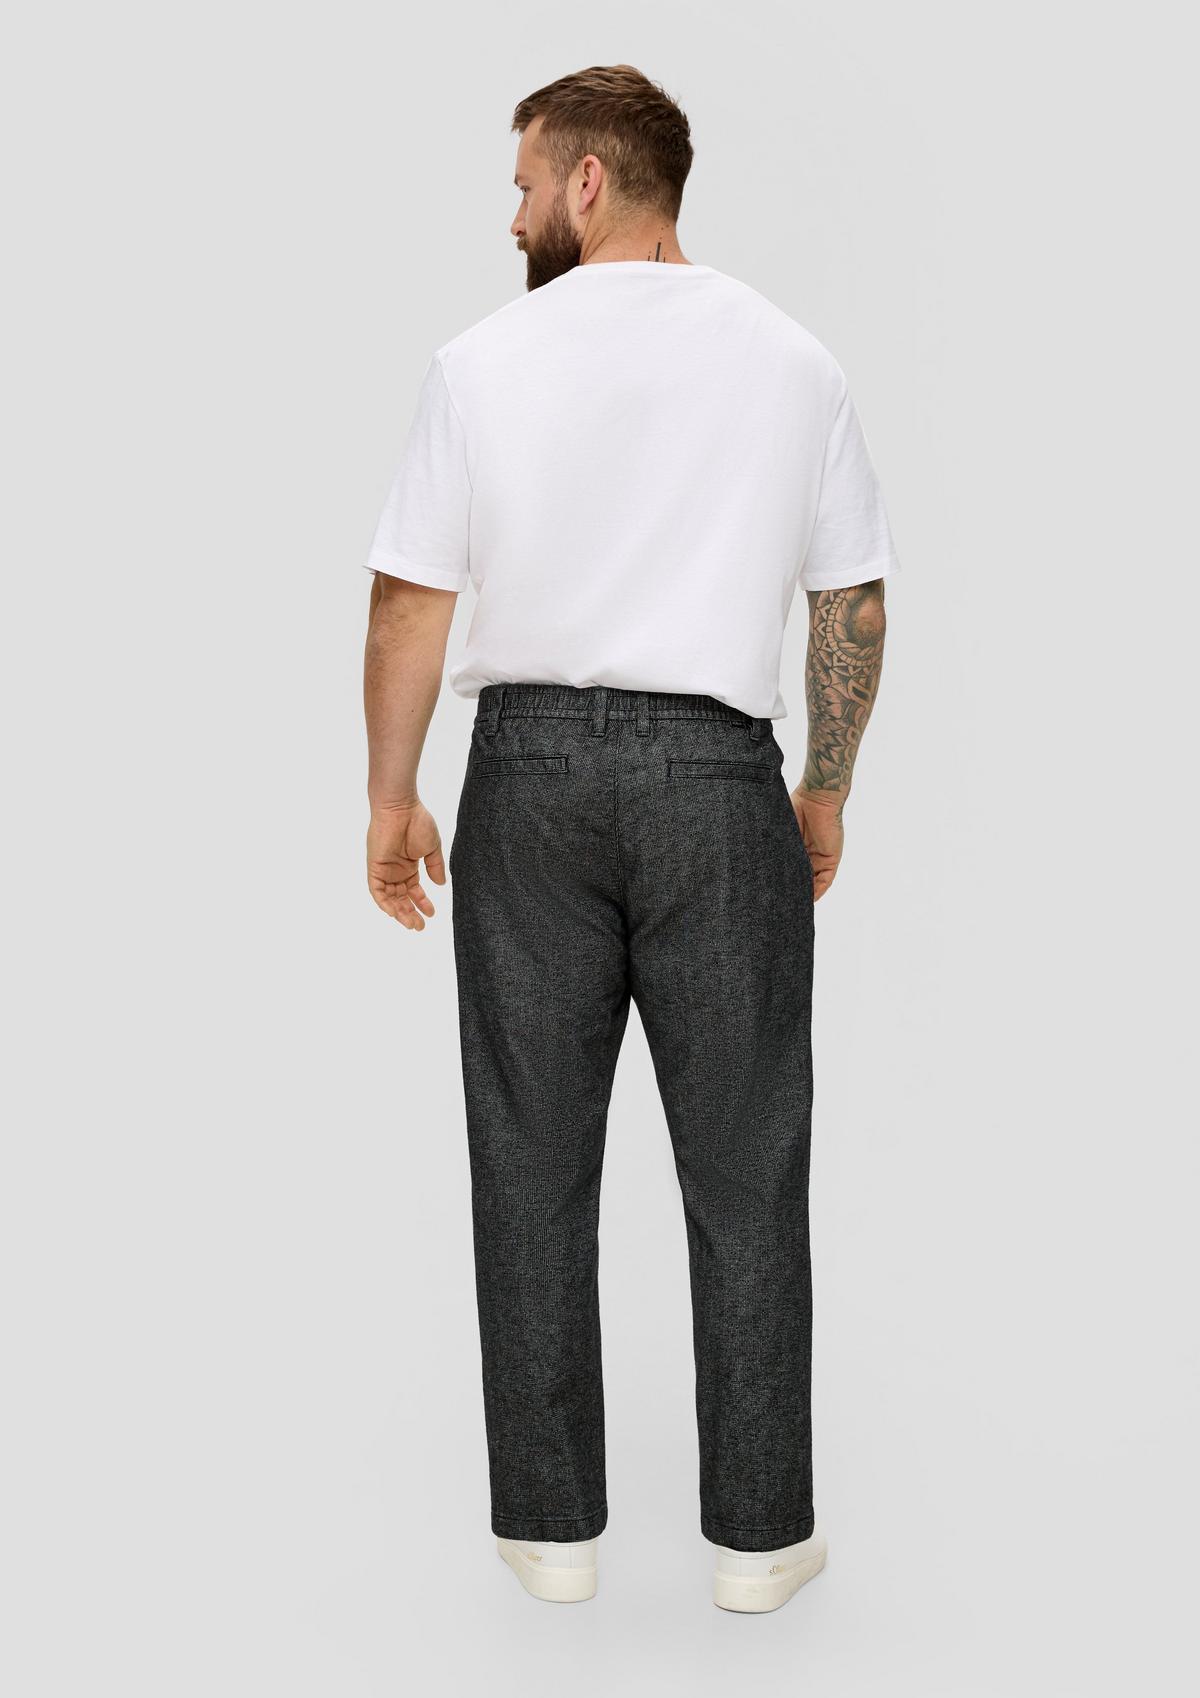 s.Oliver Detroit: trousers with a dobby texture